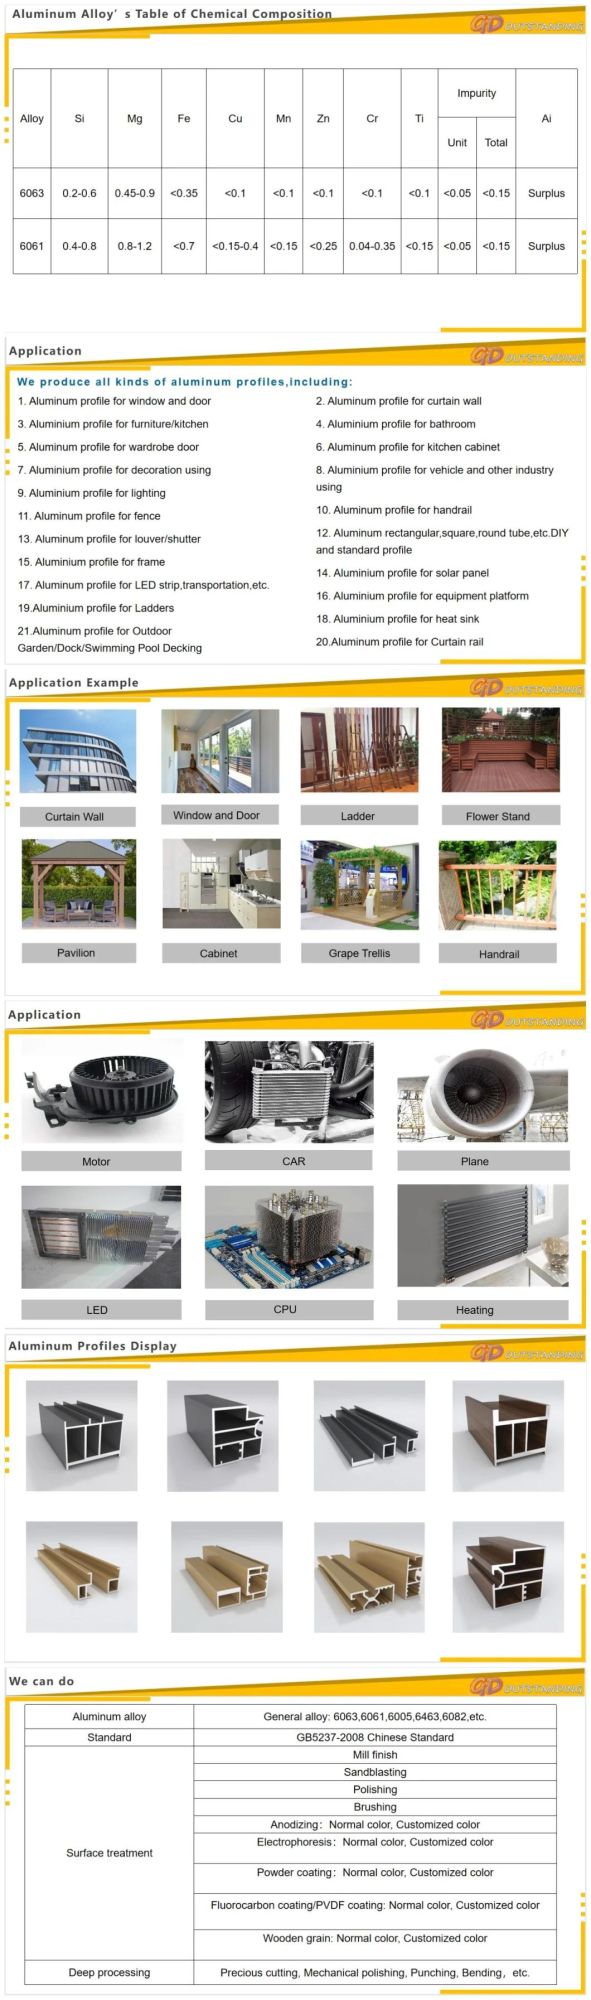 Architectural Aluminum Profile with Powder Coating/Anodizing/Electrophoresis/Wooden Color/PVDF. etc